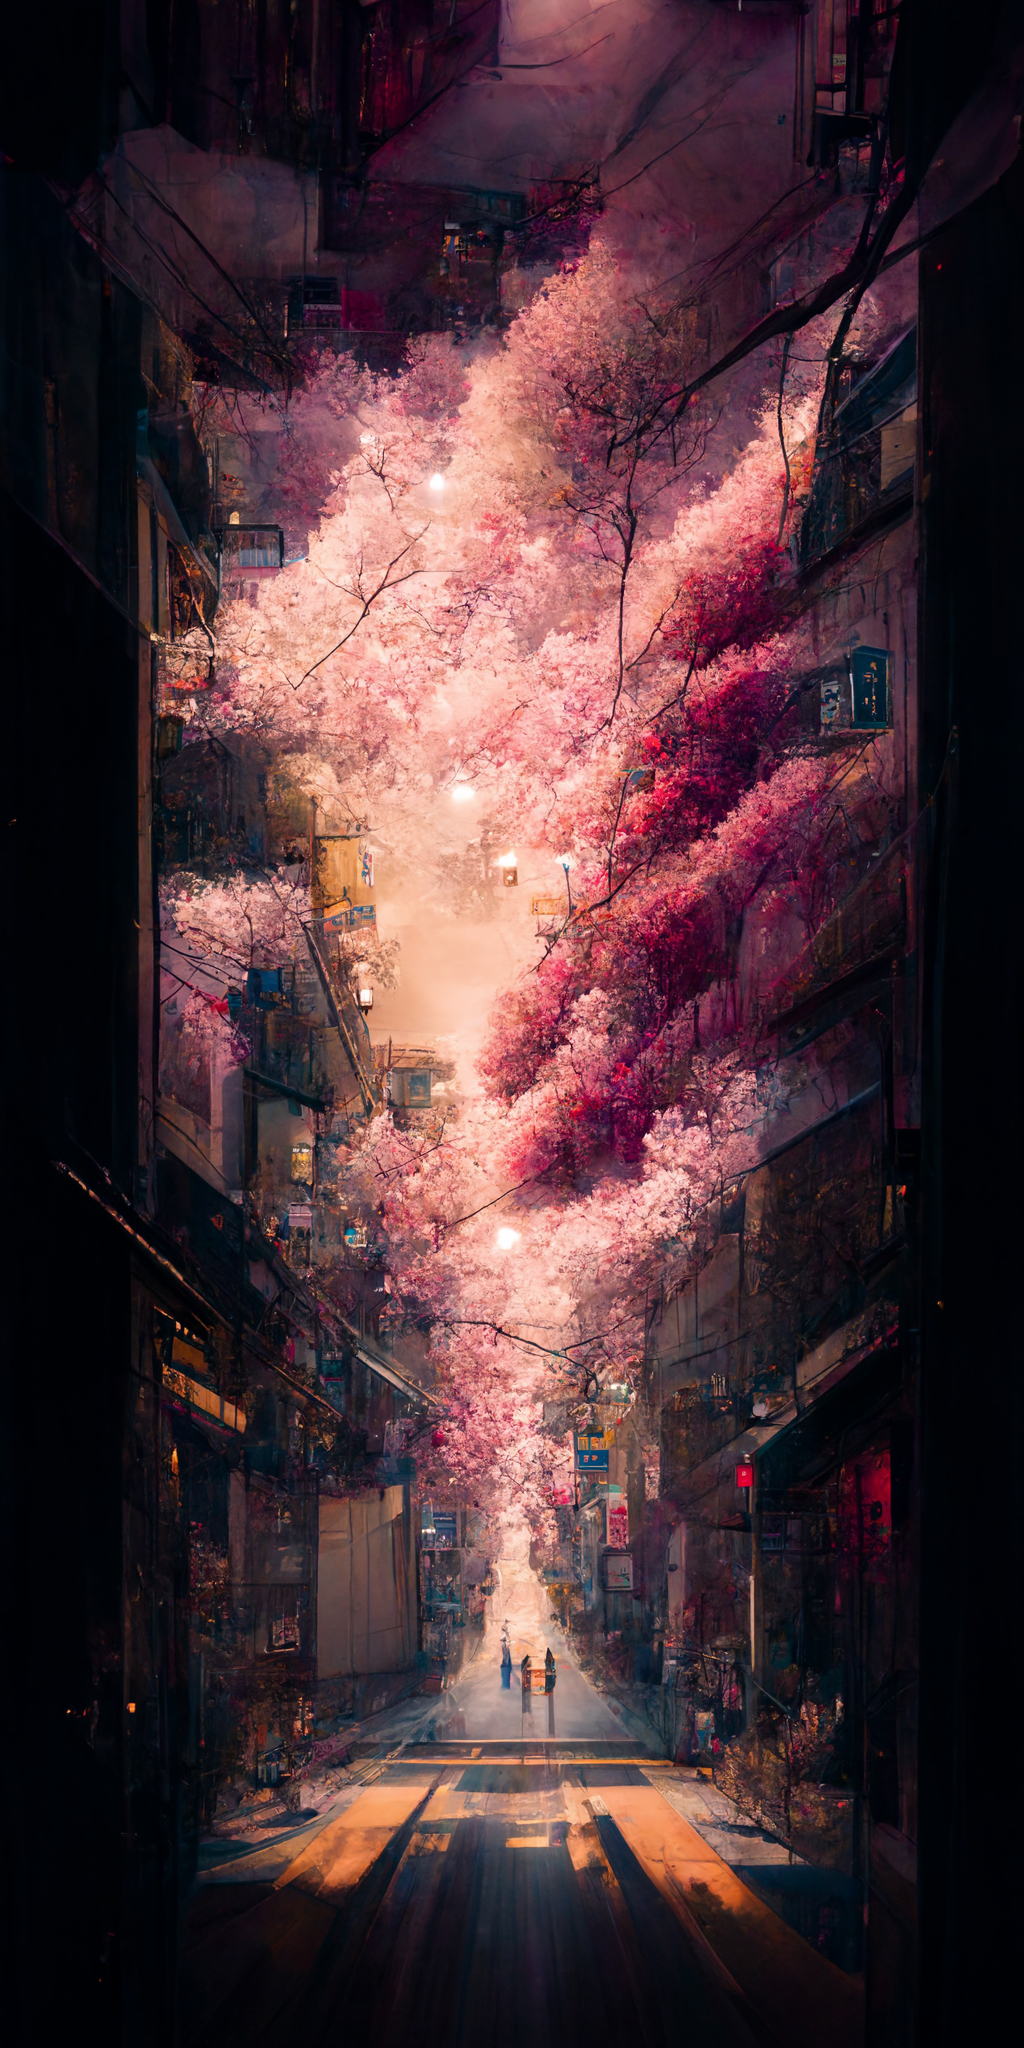 Bluewing_an_alley_in_Tokyo_with_cherry_blossoms_Sony_a7_III_Top_5462fee9-c22f-46b8-9feb-254b6dc5132d.jpeg